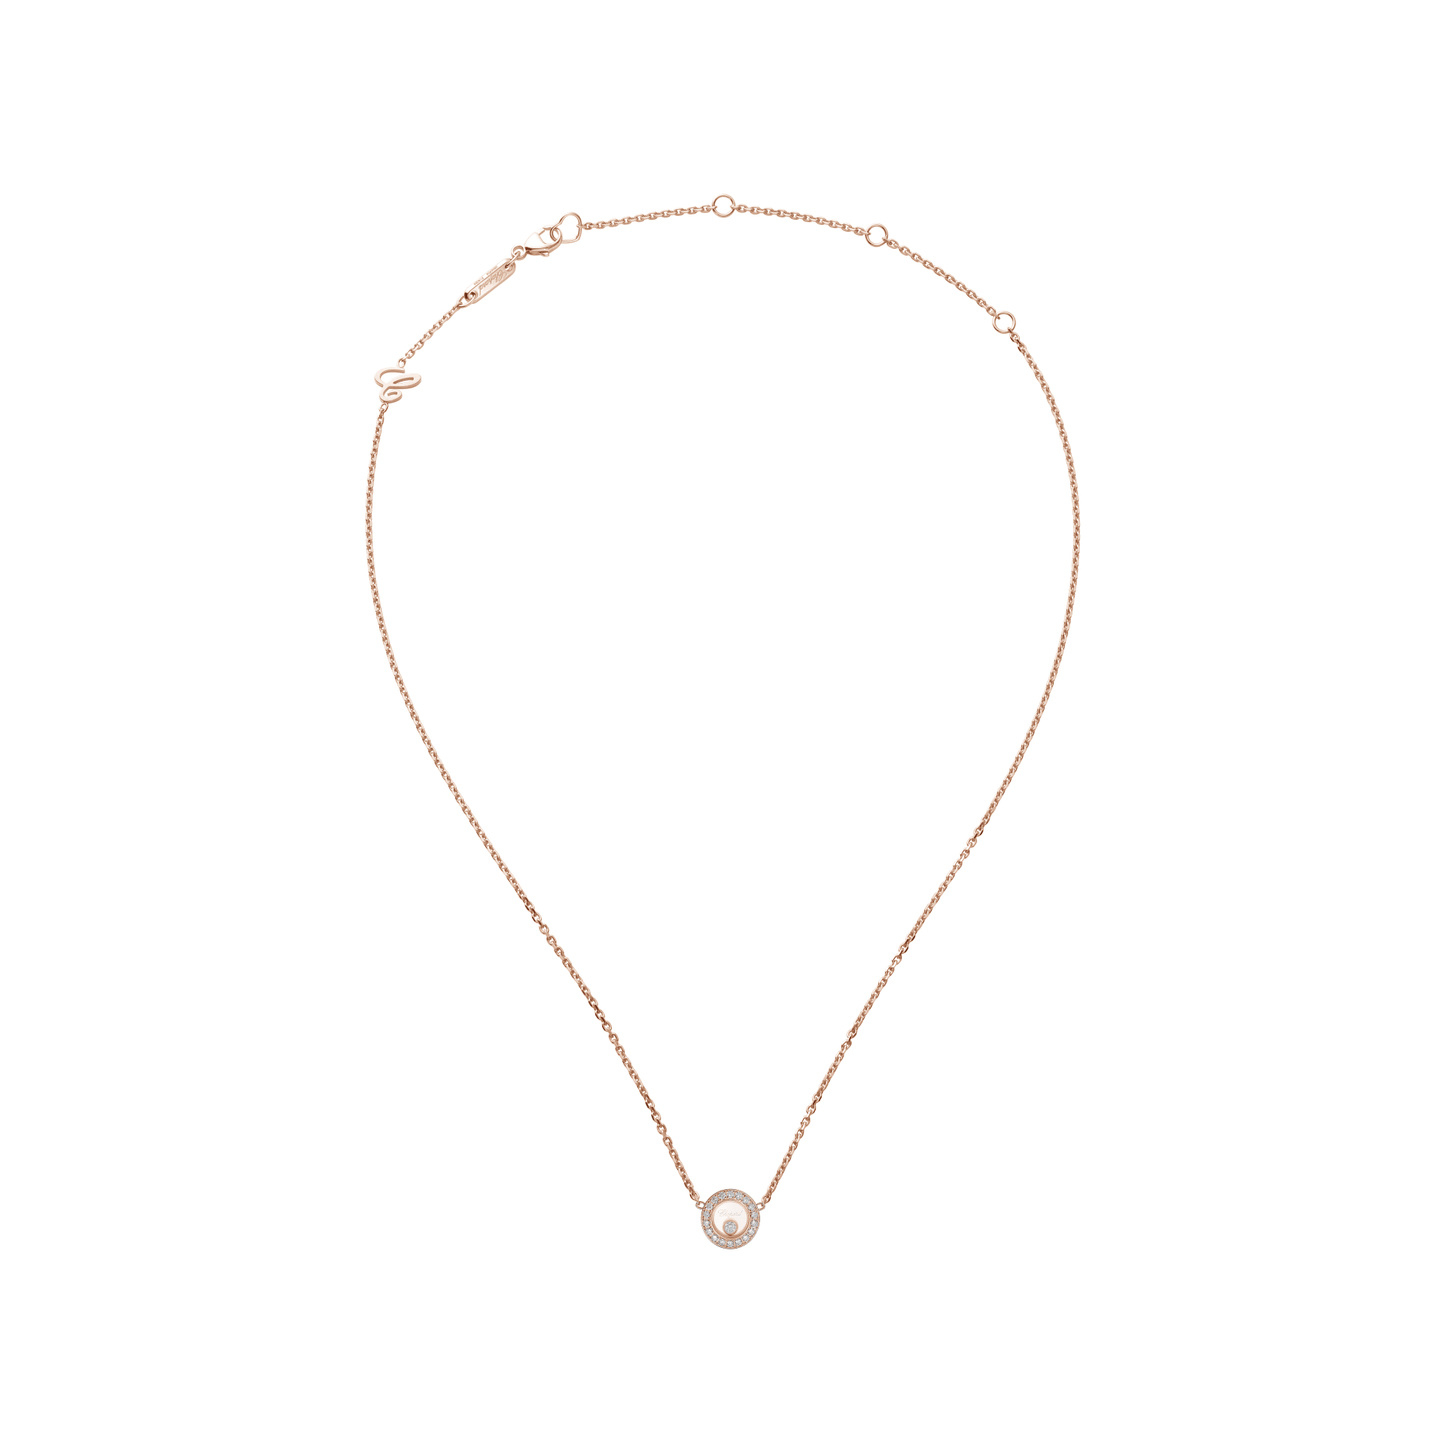 HAPPY DIAMONDS ICONS NECKLACE, ETHICAL ROSE GOLD, DIAMONDS 81A017-5201